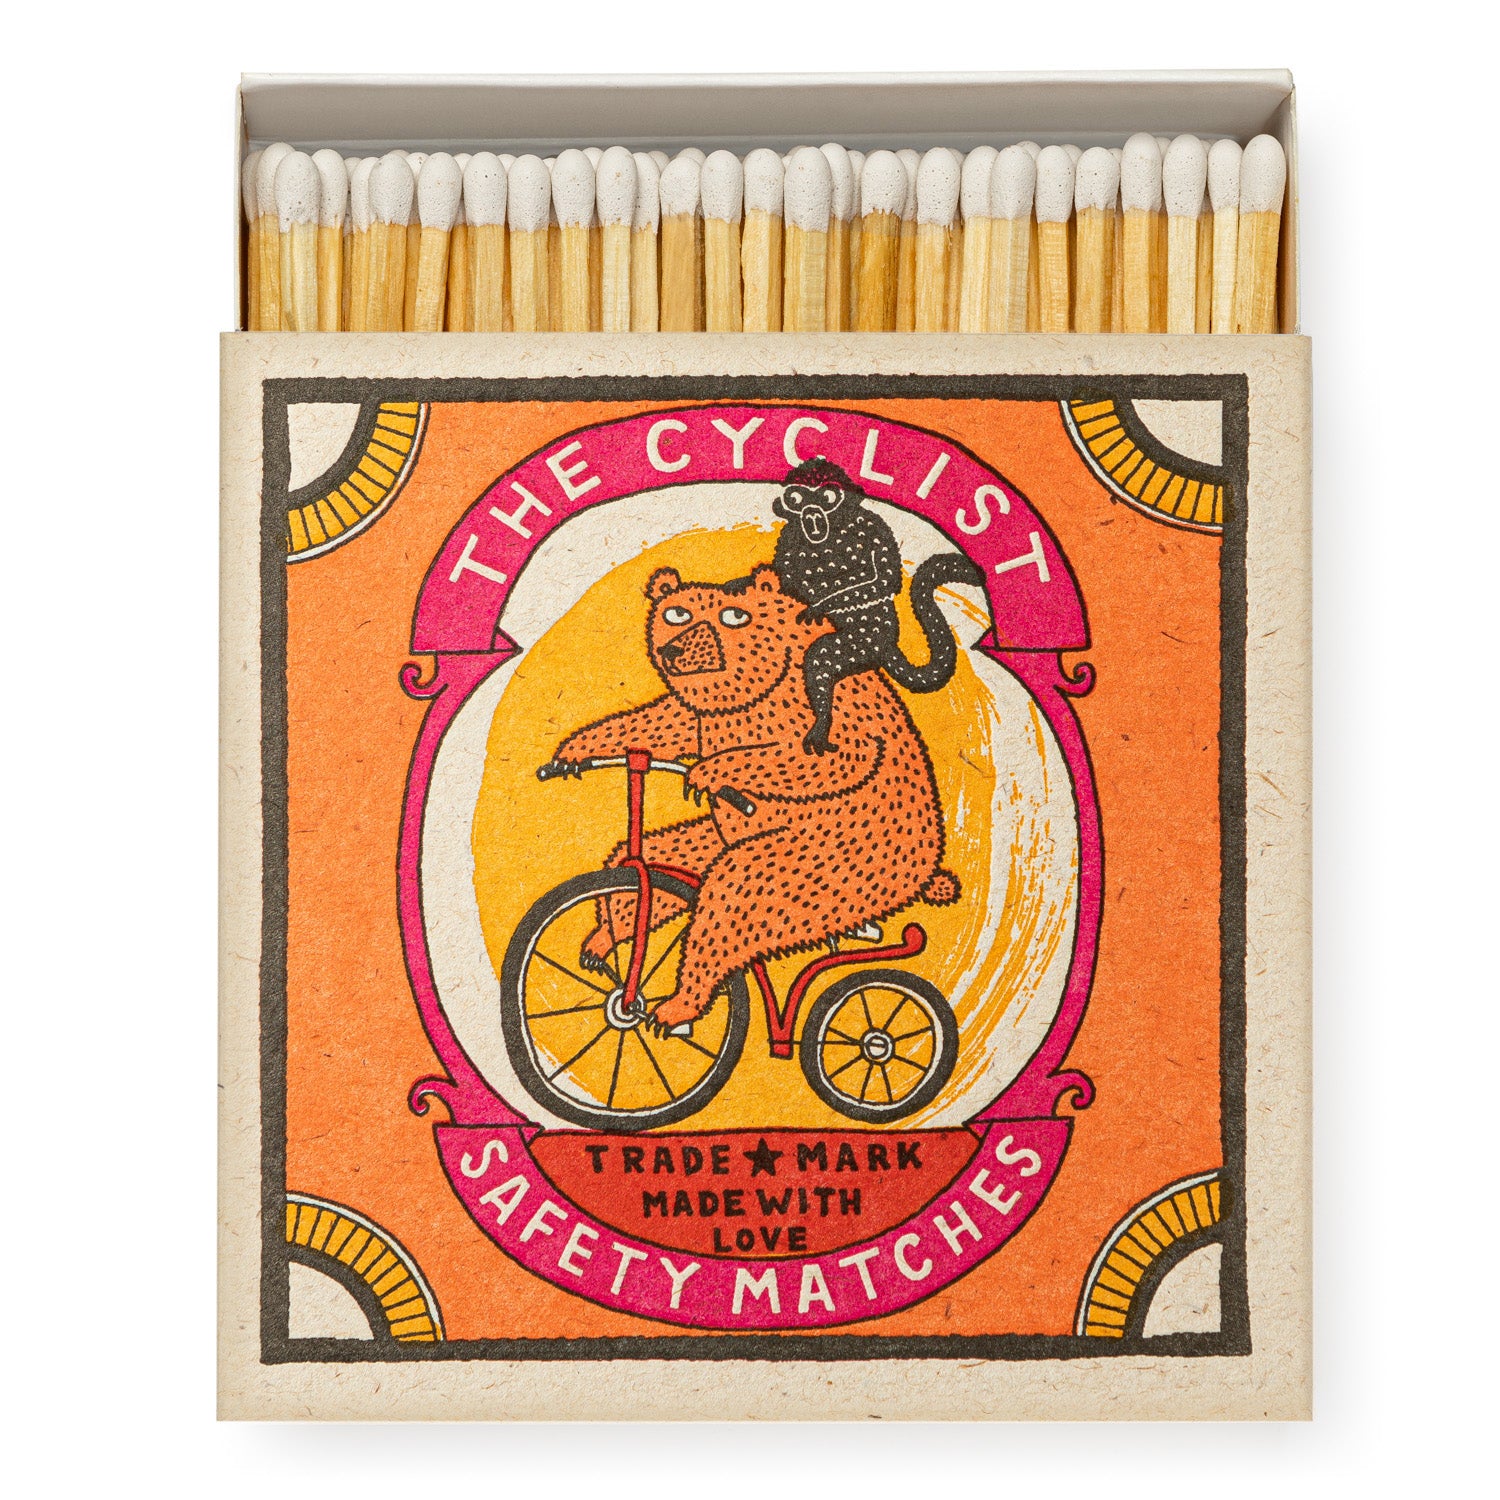 Long Matches - Square Box | The Cyclist | by Archivist - Lifestory